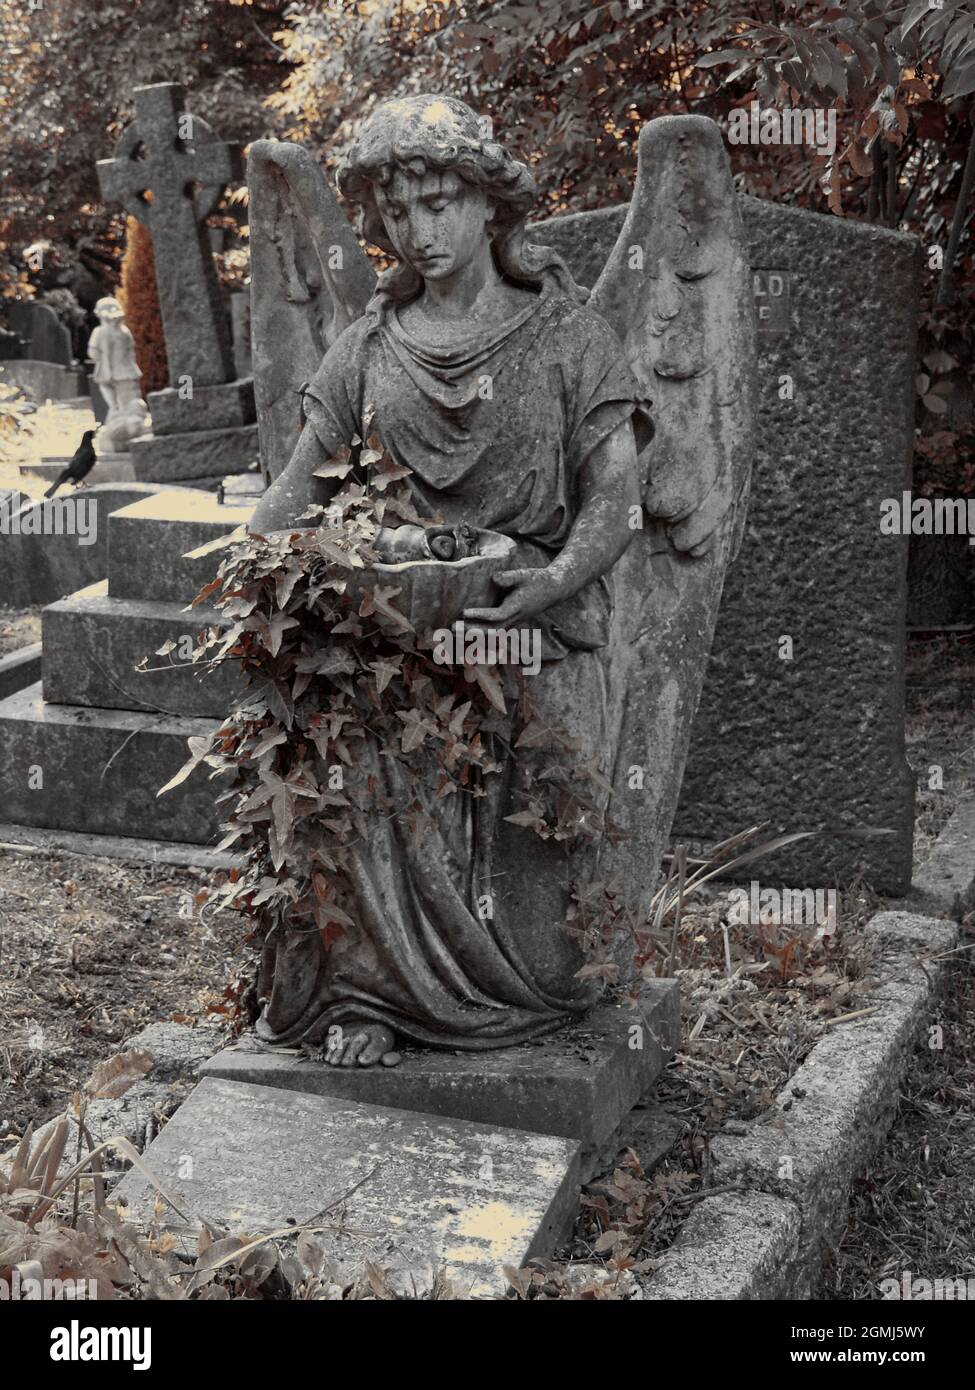 A grave adorned with the sculpture of an angel. London Highgate Cemetery. UK. Stock Photo